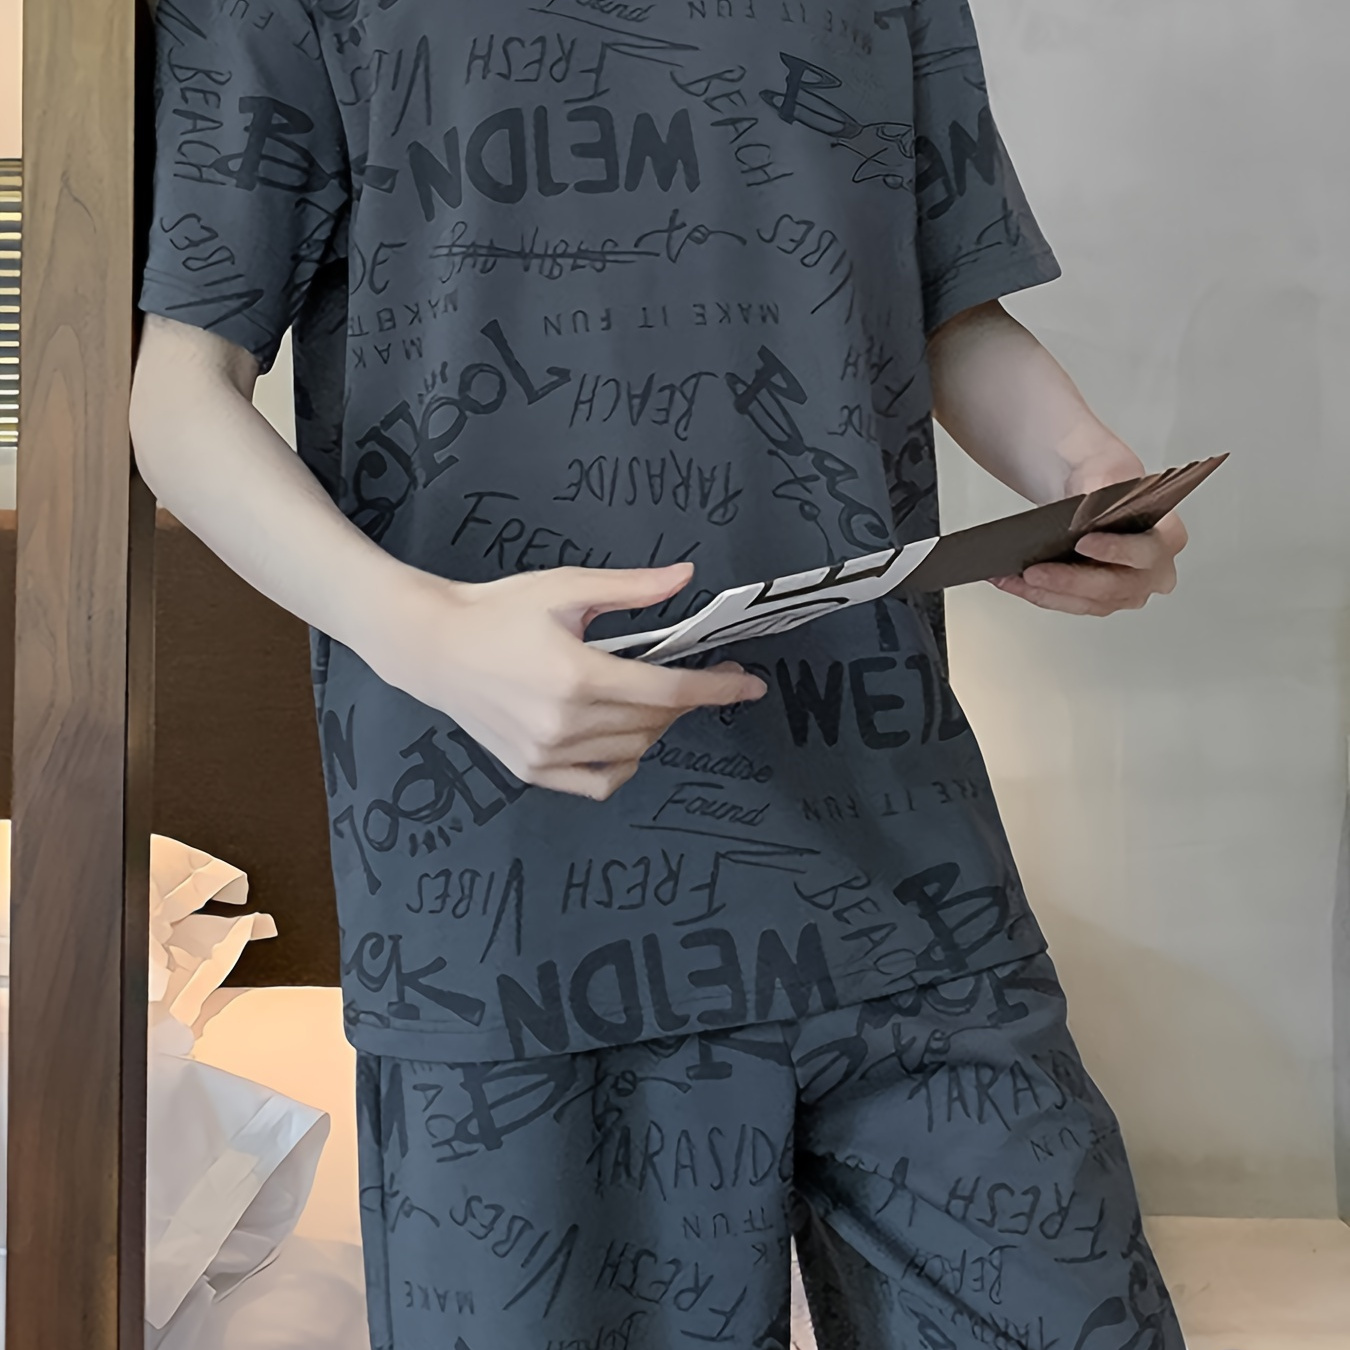 

Men's Trendy Casual Creative Letter Comfy Tees & Shorts, Crew Neck Short Sleeve T-shirt & Loose Shorts With Home Pajamas Sets, Casual Sets For Summer